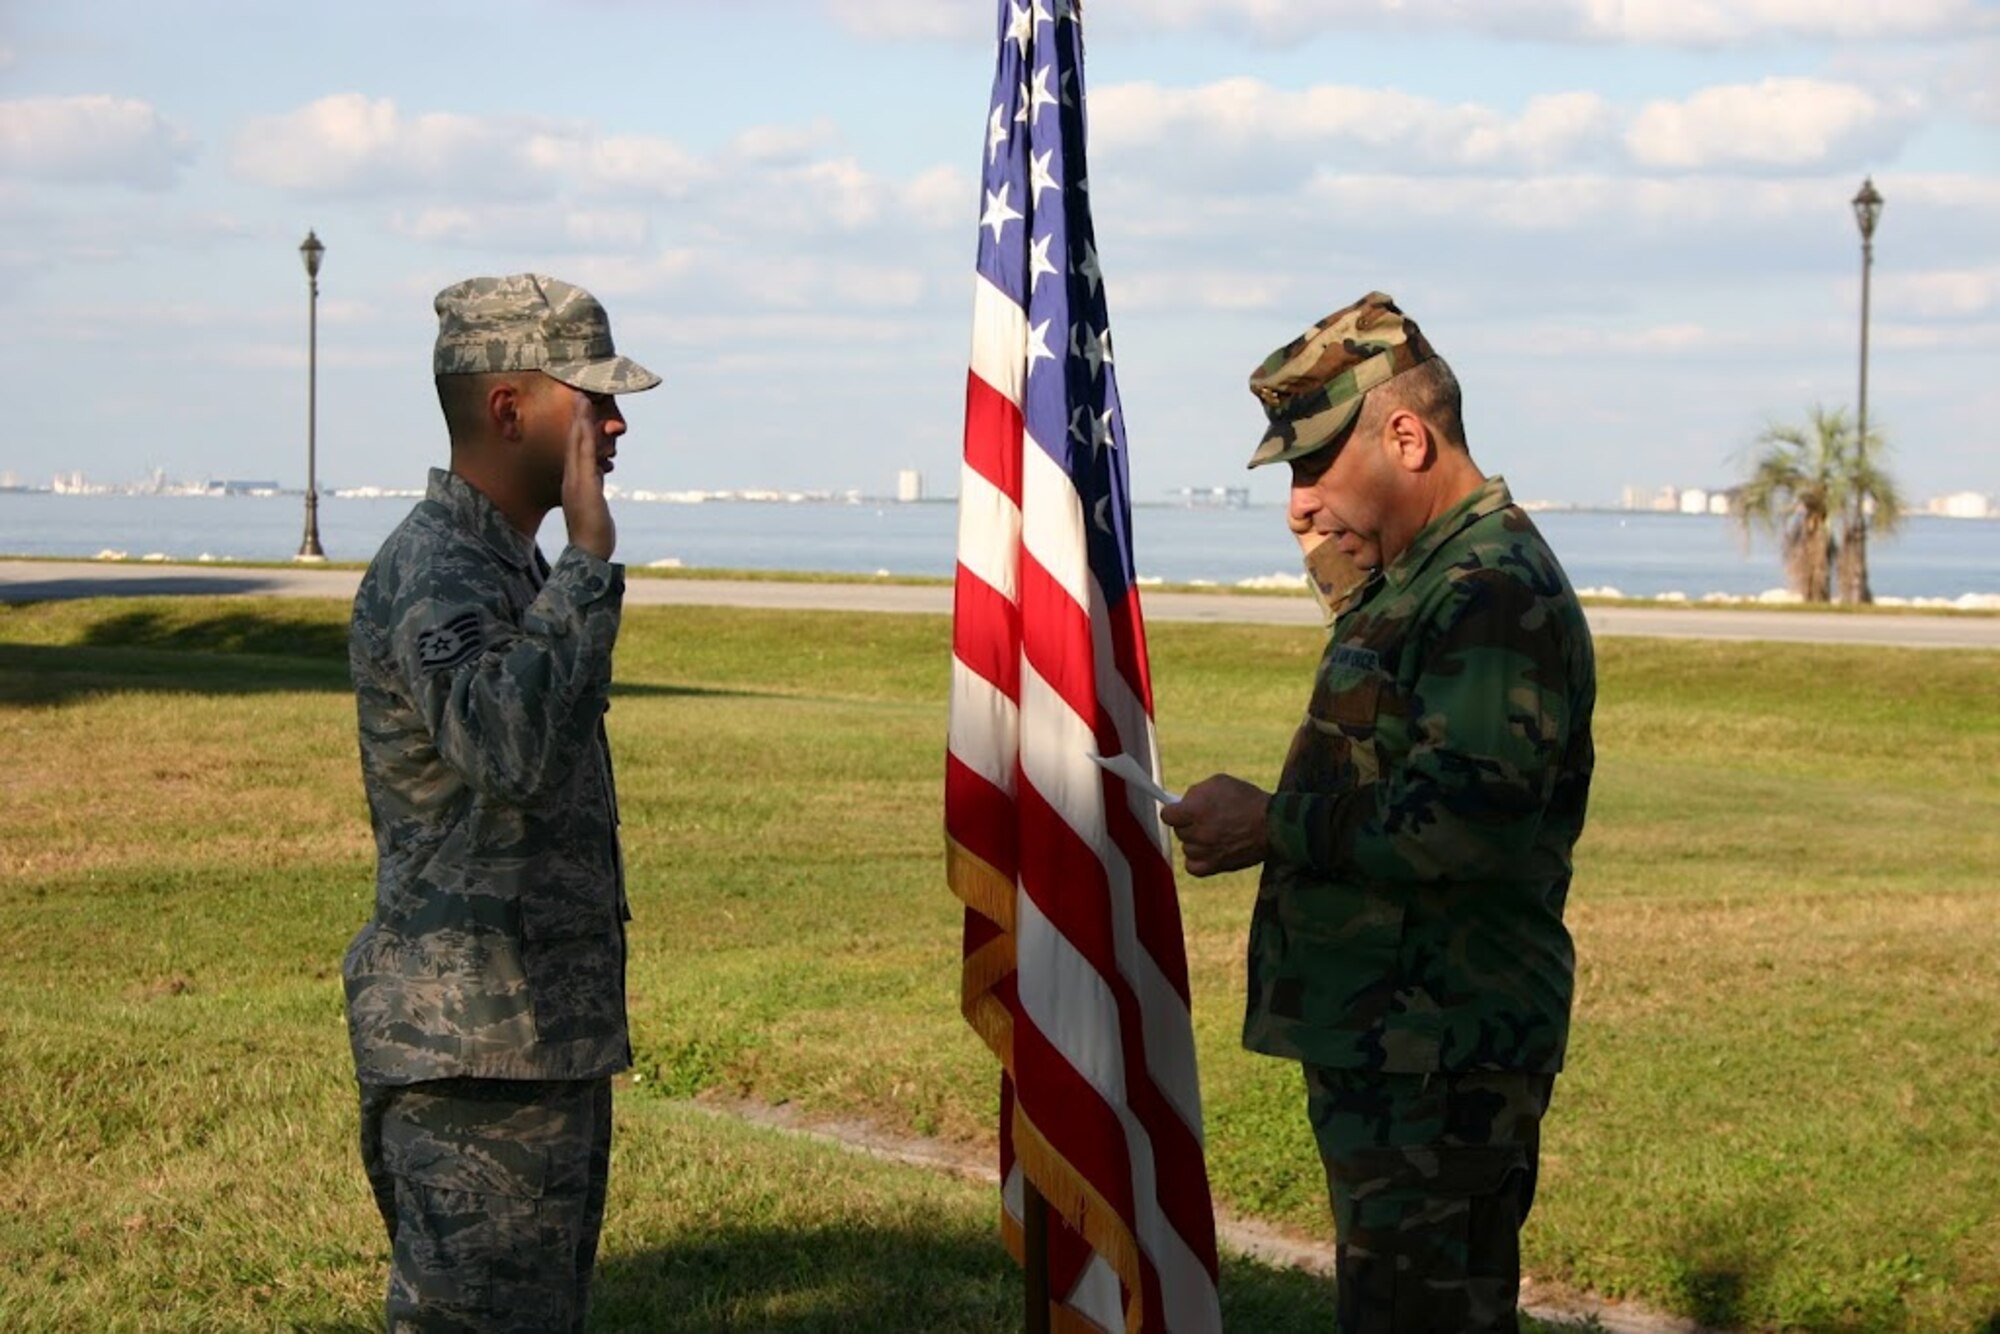 Then-Tech. Sgt. Jose Melendez re-enlists in the U.S. Air Force during a 2008 ceremony. Now-1st Lt. Melendez encourages Hispanics to be proud of their heritage. (Contributed photo/Released)